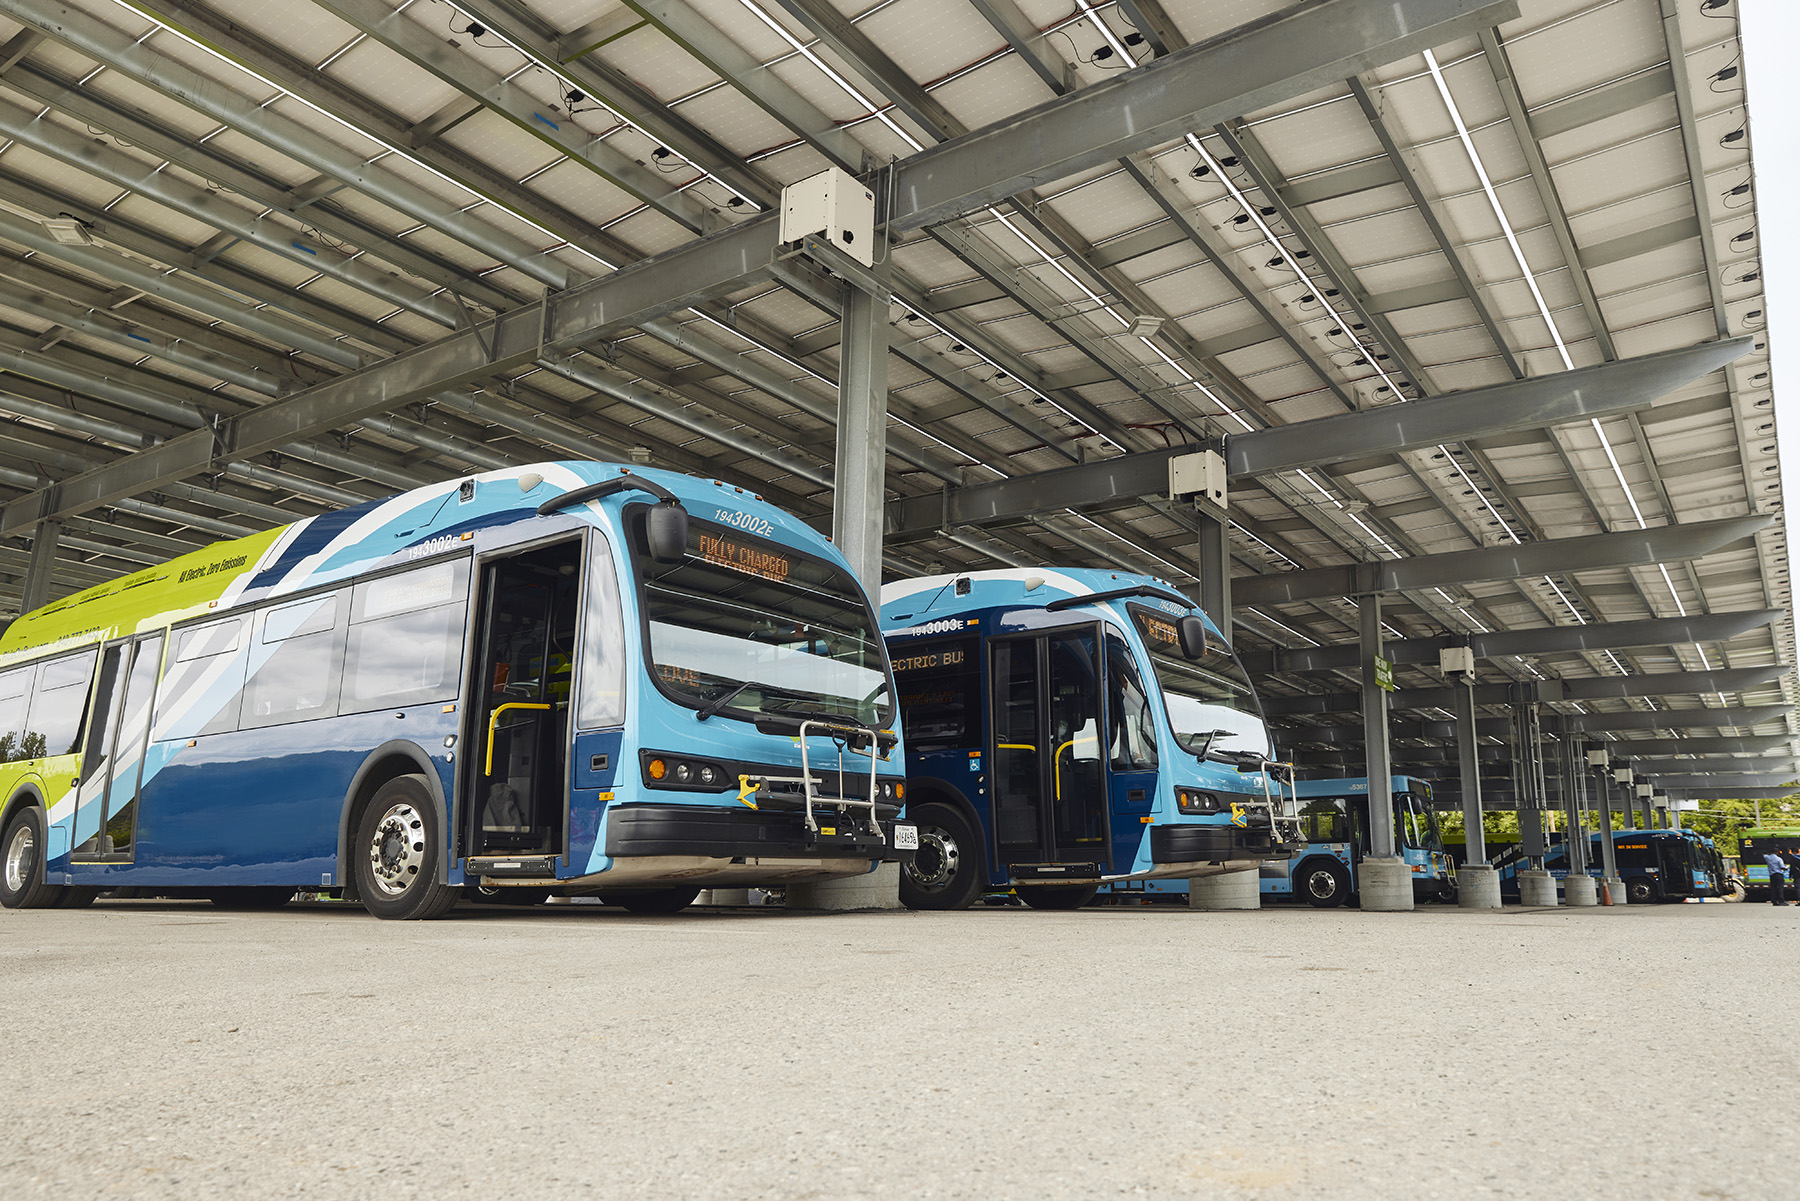 The photograph shows electric buses beneath a canopy structure. 